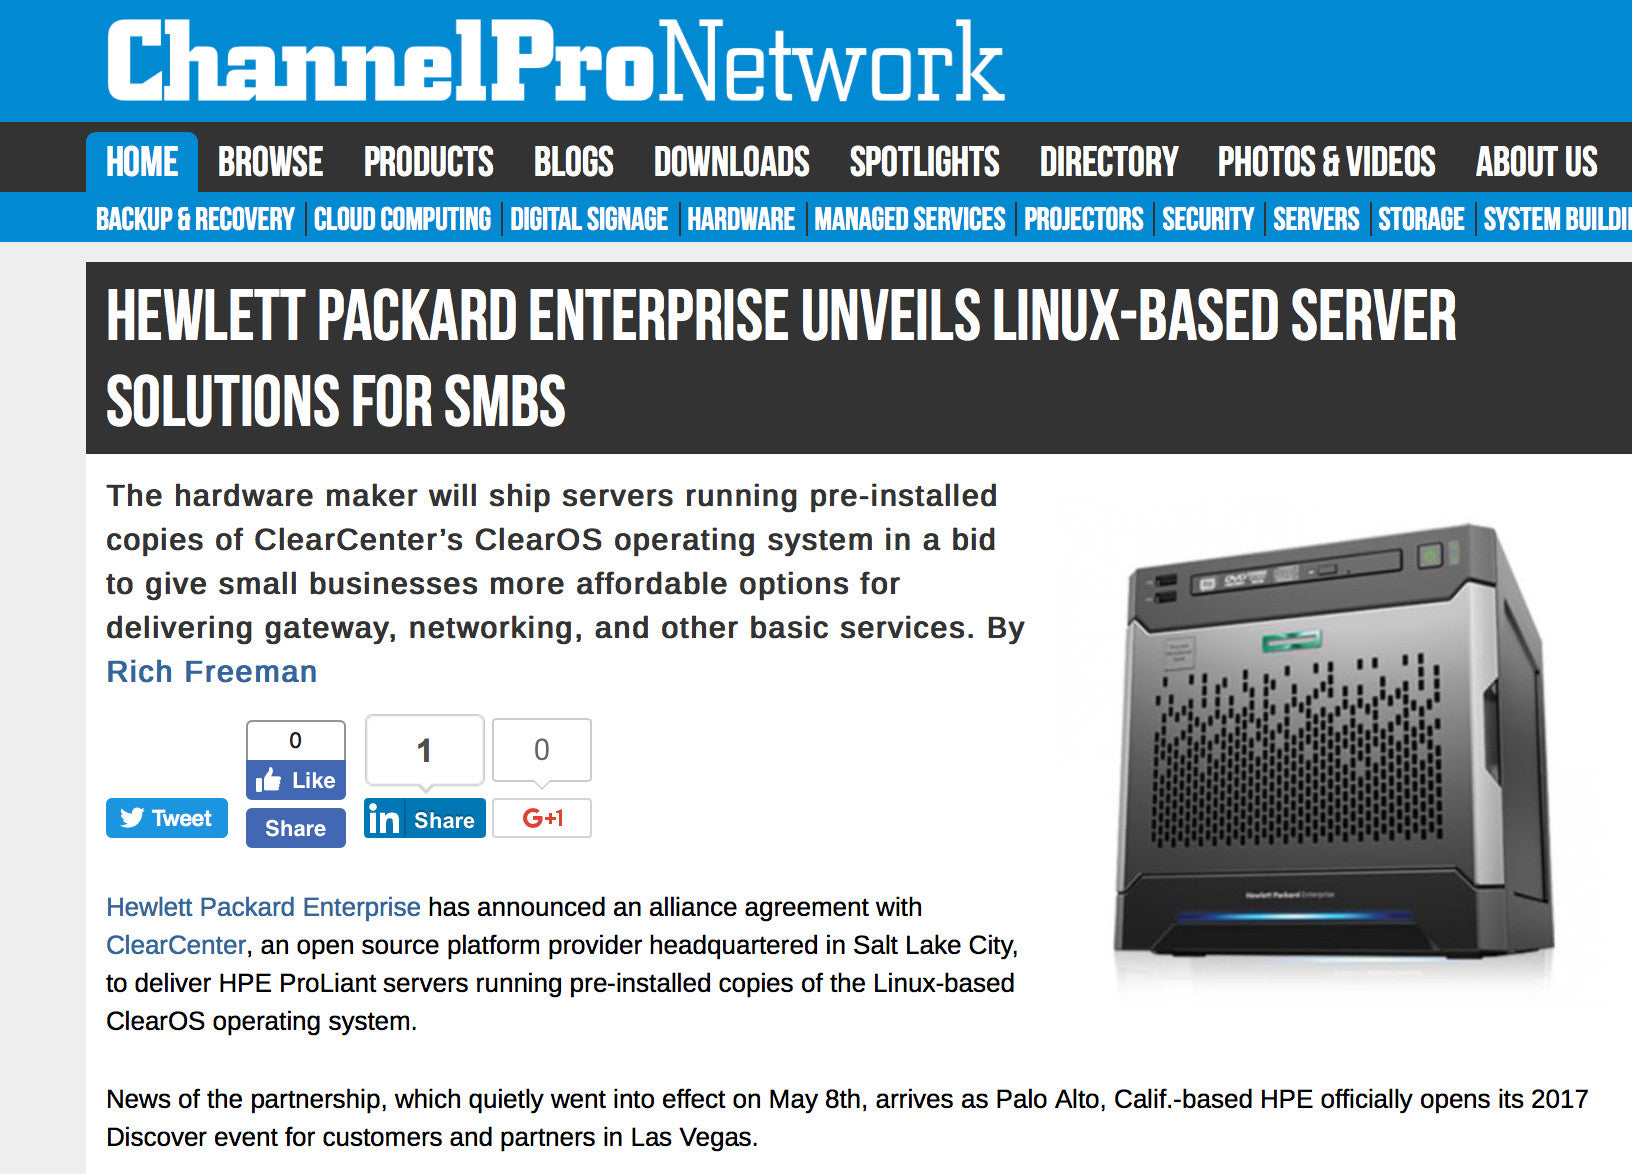 Hewlett Packard Enterprise Unveils Linux-based Server Solutions for SMBs